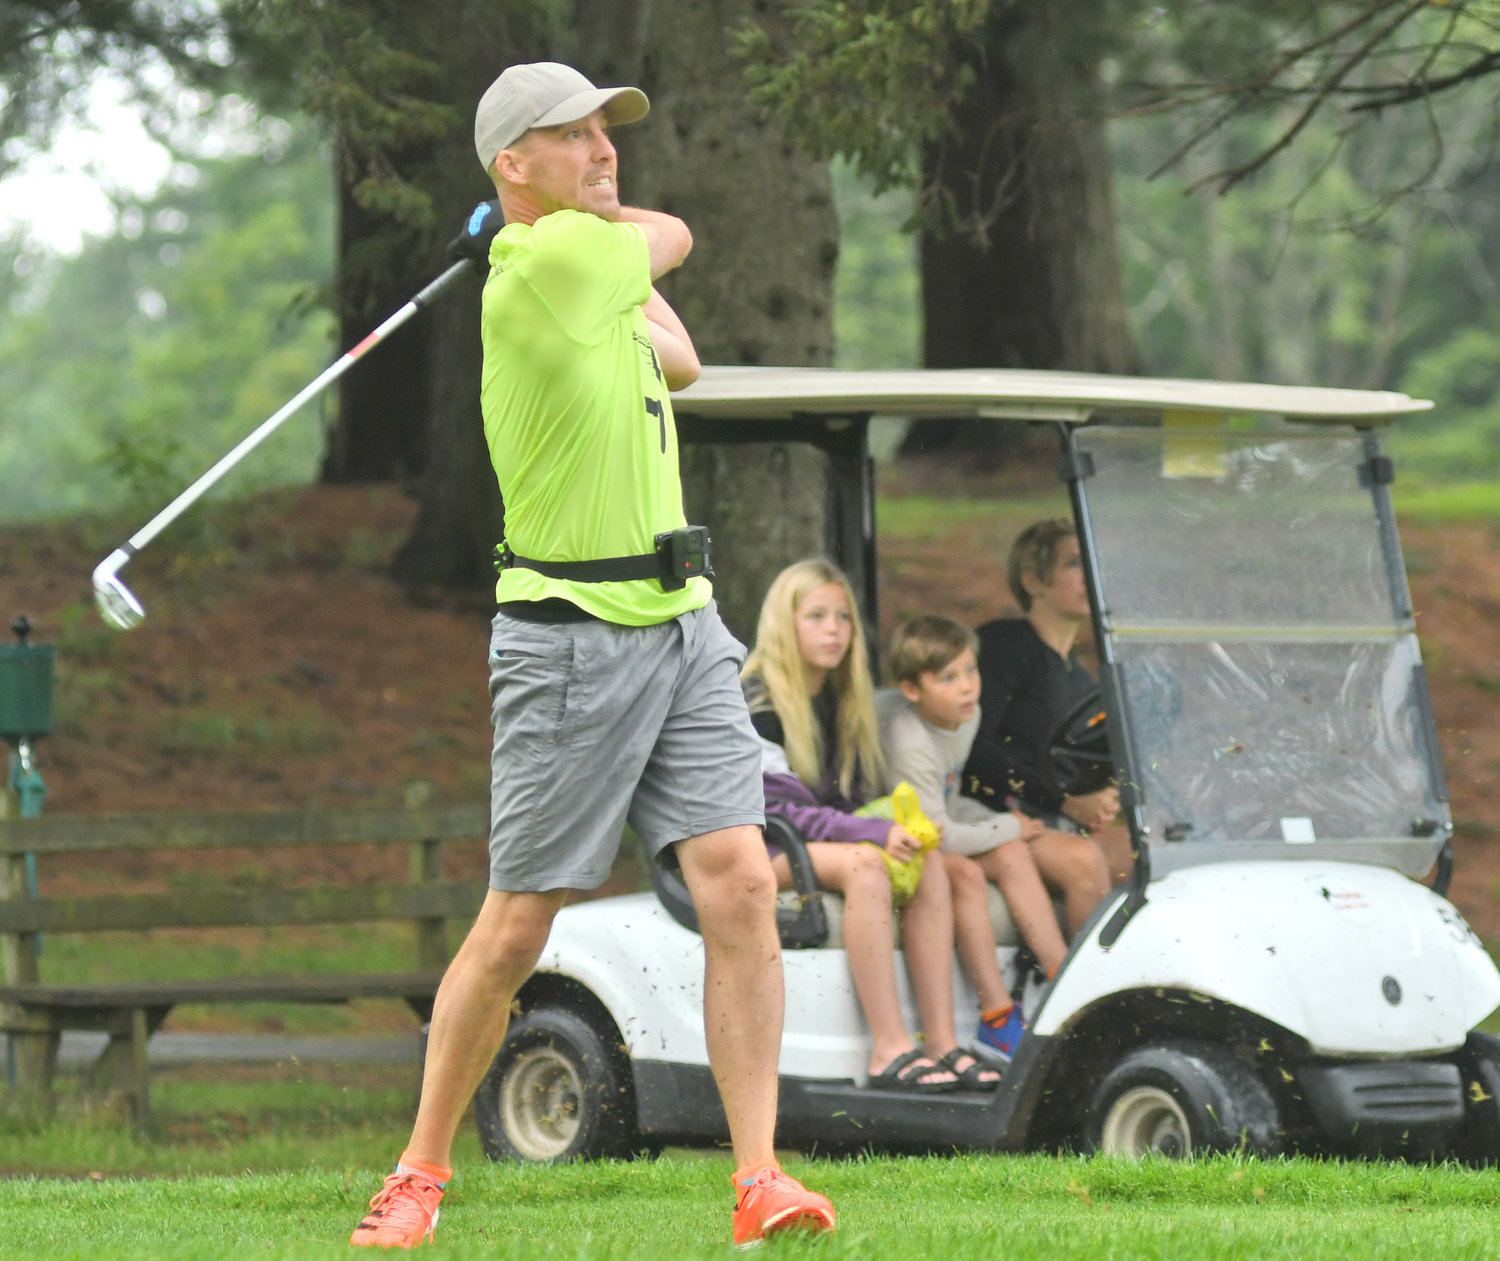 OFF THE TEE — Luther Olsen from Holmes, Wis., watches his tee shot on three fly with his family watching in the golf cart during the second round of the Thirsty Owl New York Speedgolf Open at Rome Country Club.